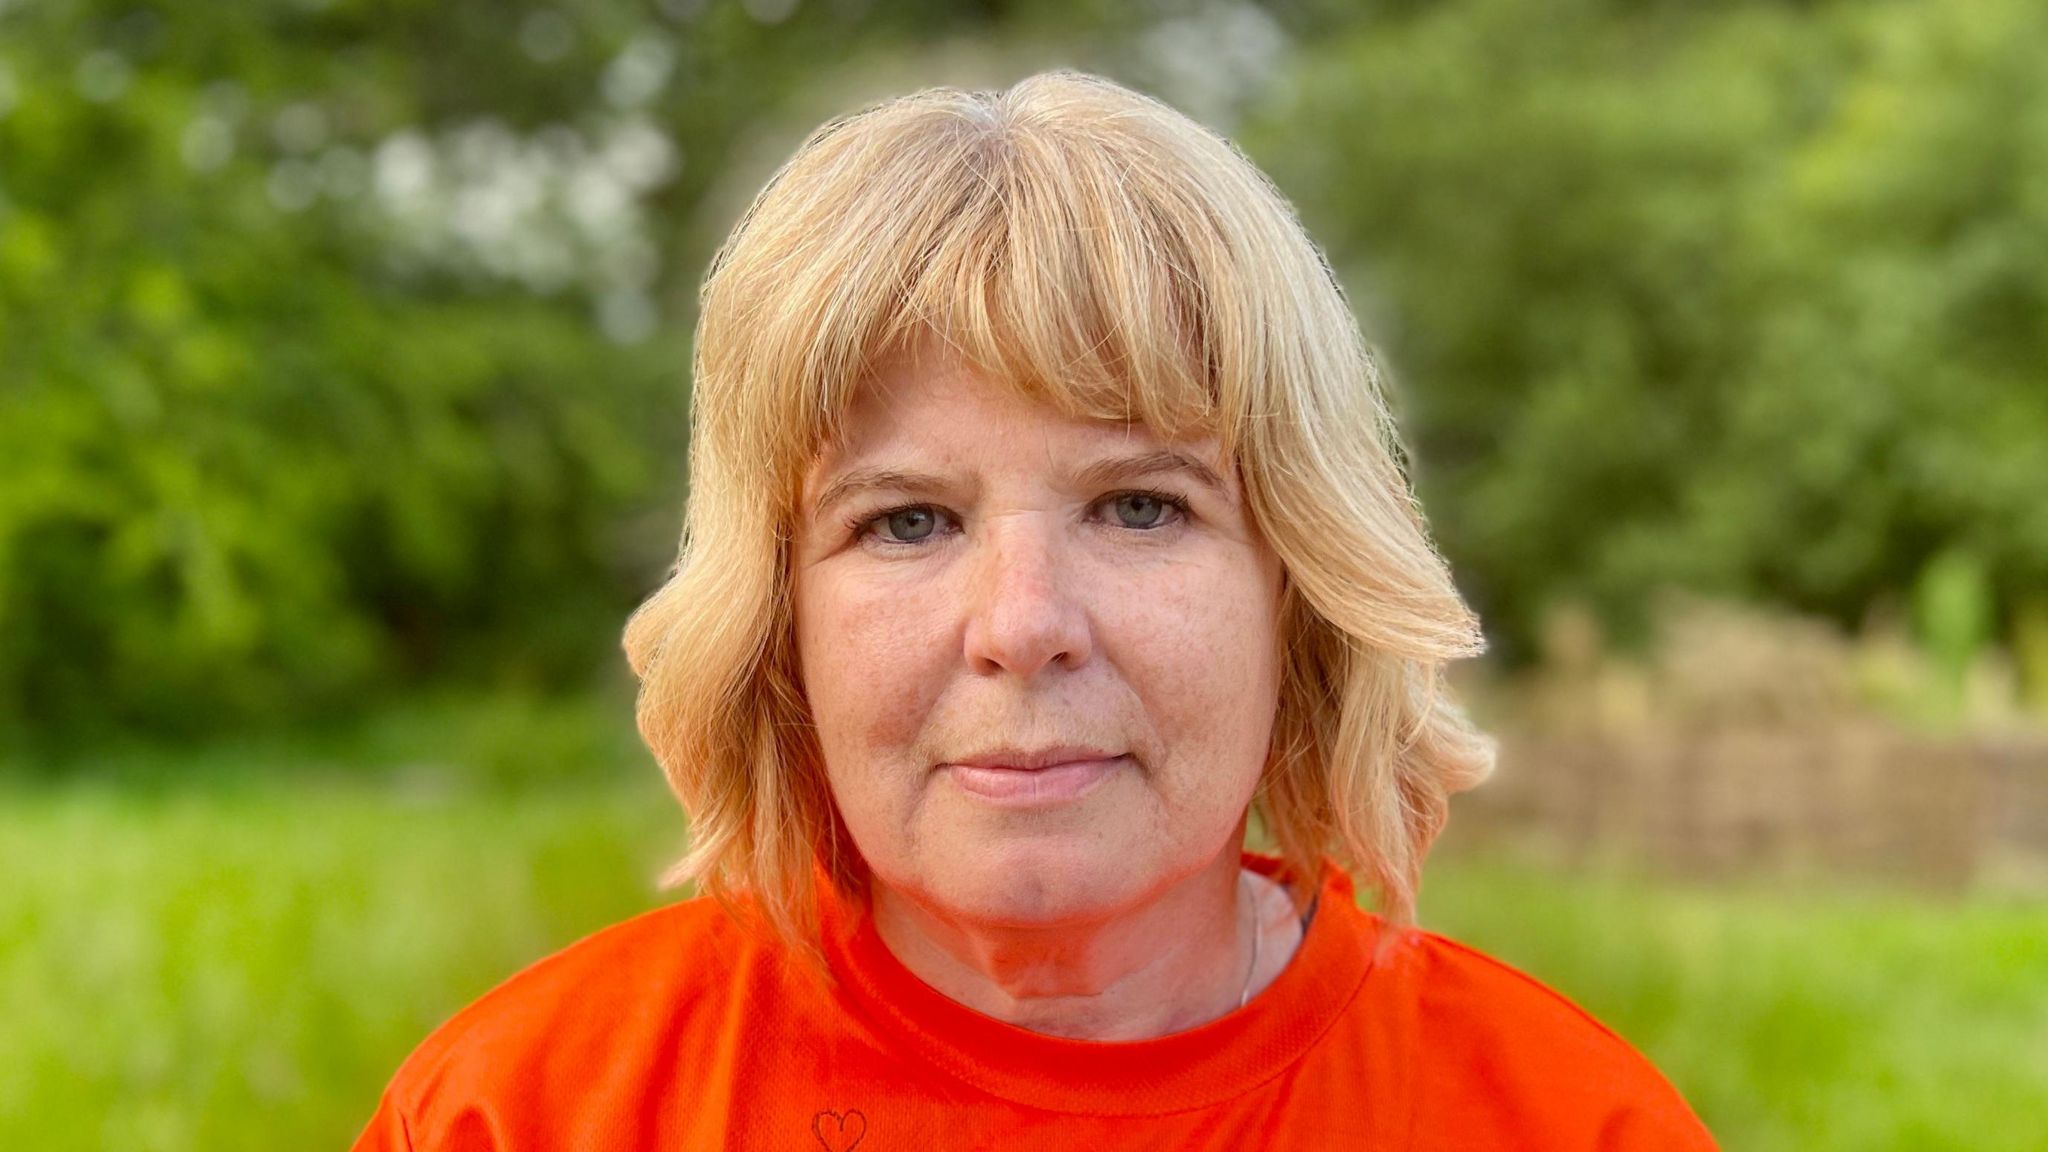 Becci Butlin standing outside in a green space and looking directly at the camera, she has blonde hair and wearing an orange T-shirt.